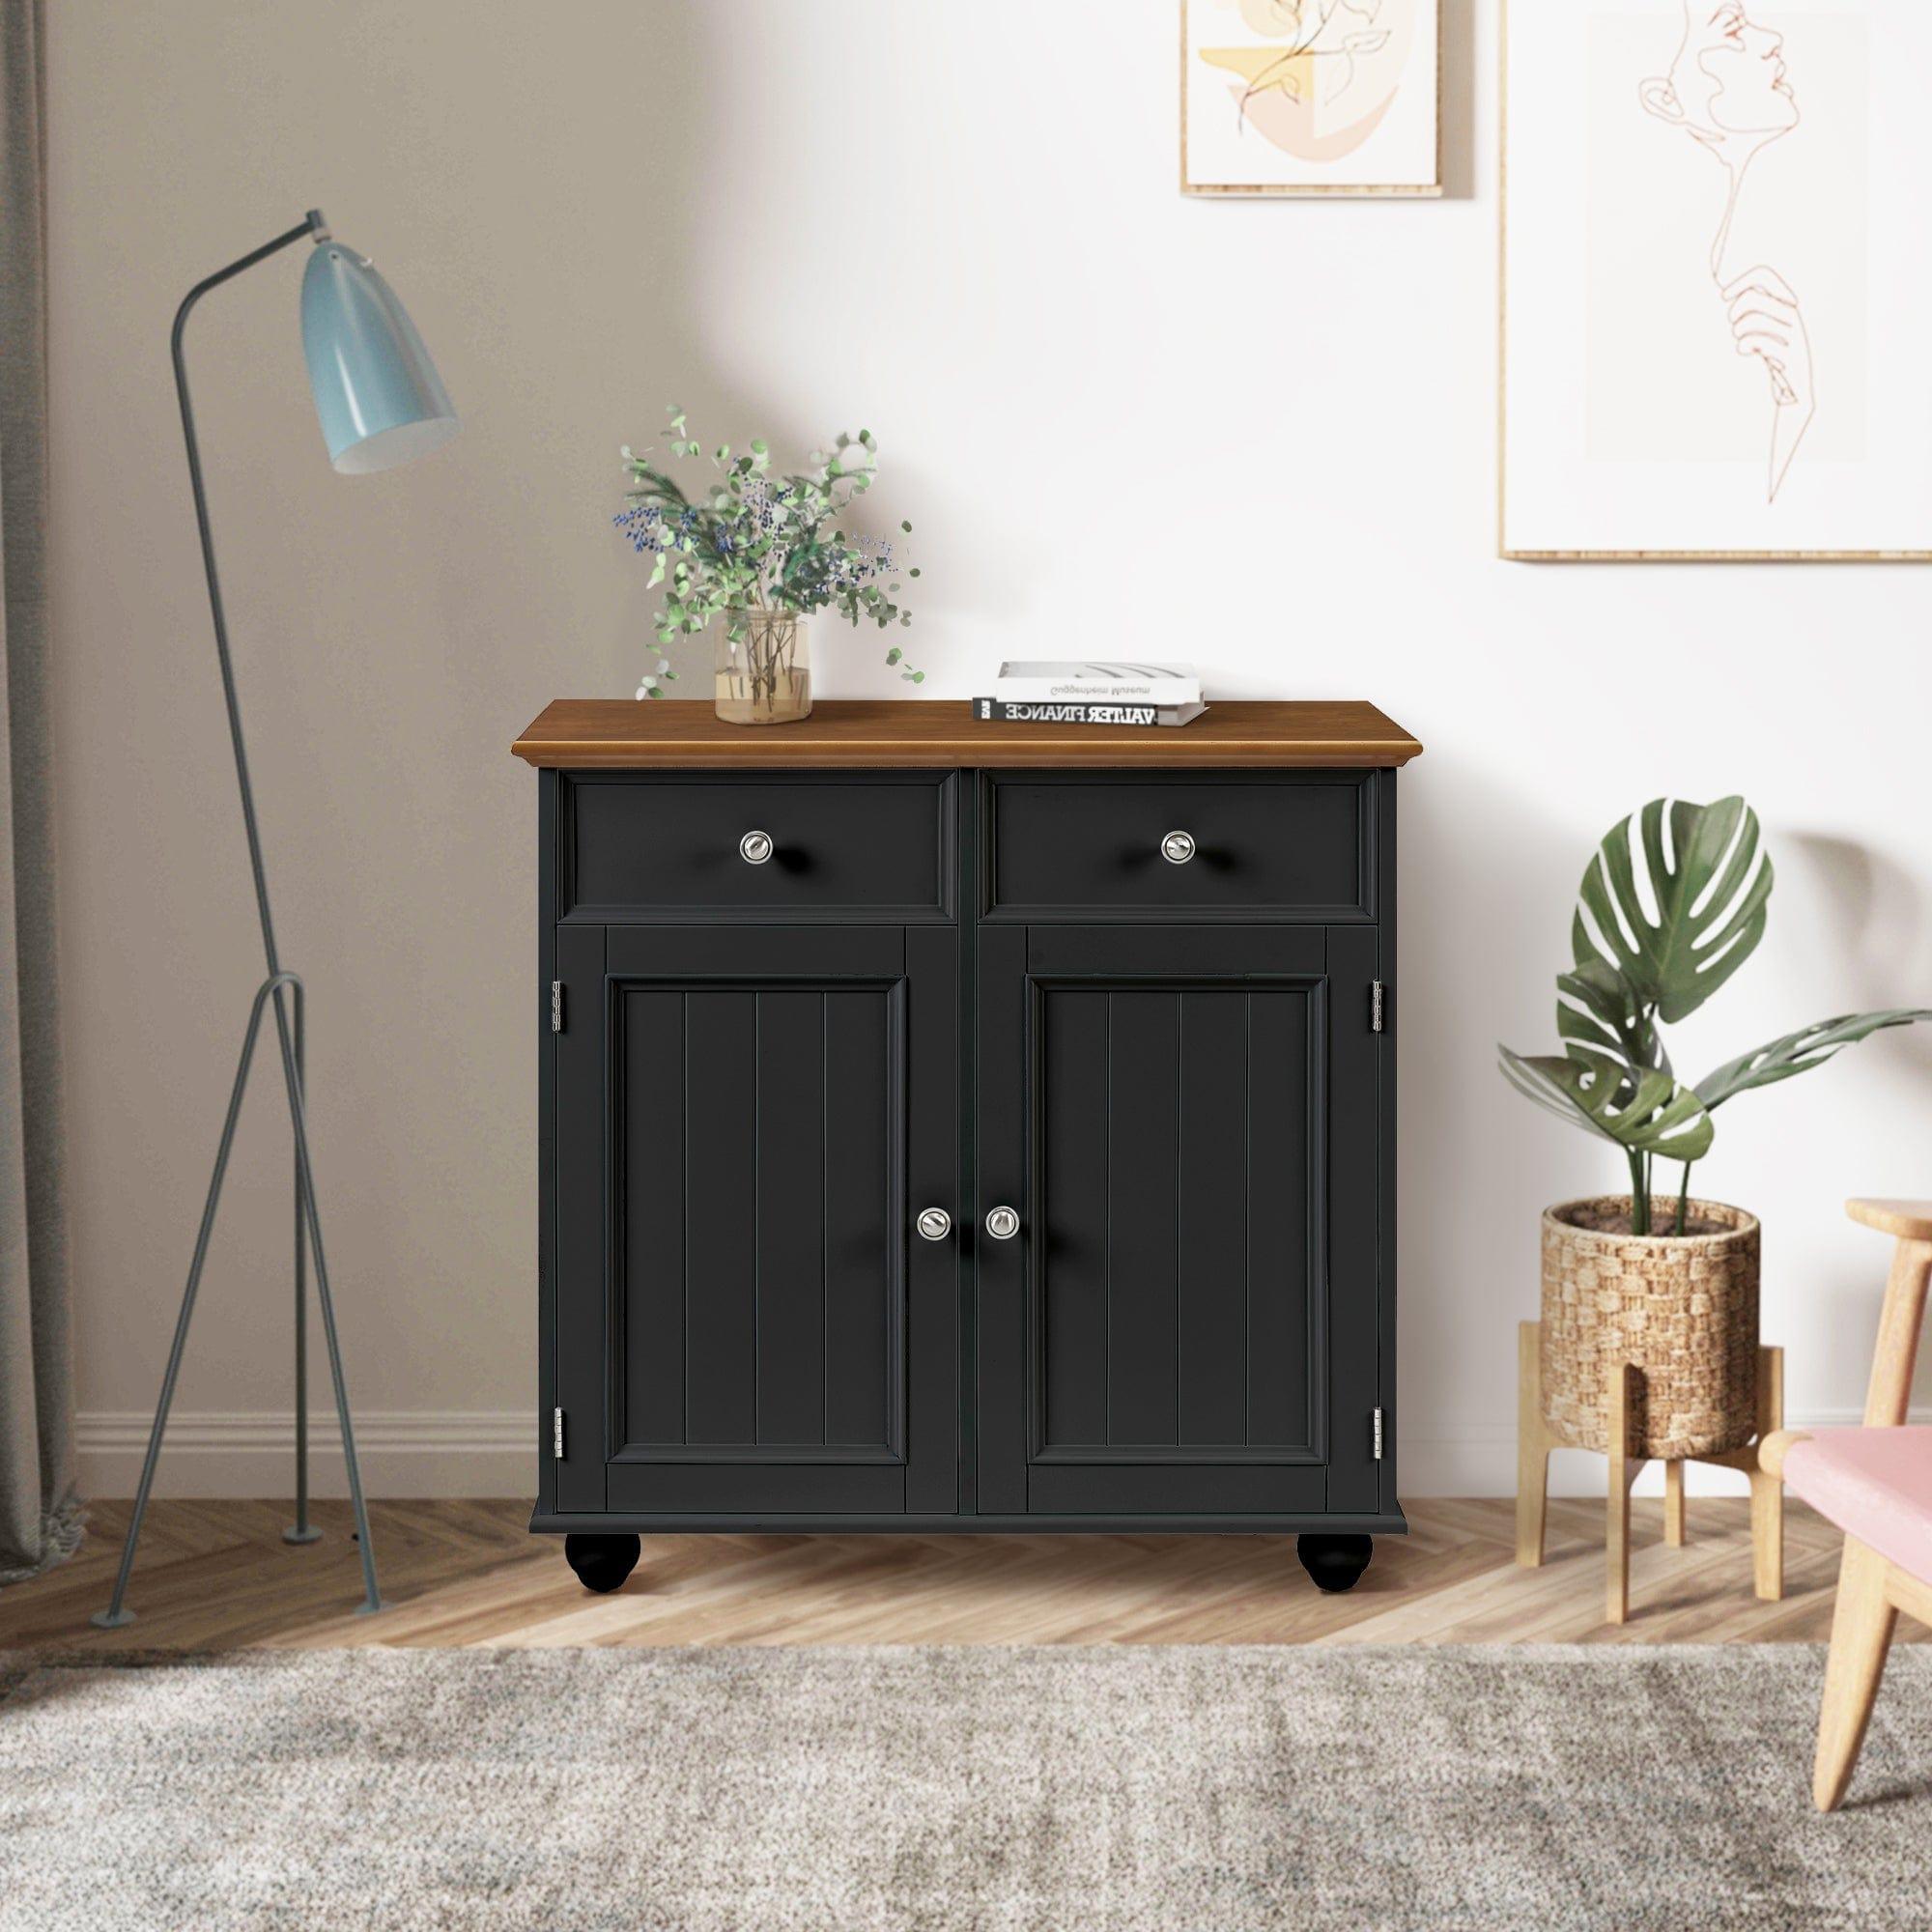 Shop Modern Sideboard Buffet Cabinet with Storage Cabinets, Drawers and Shelves for Living Room, Kitchen, Black Mademoiselle Home Decor